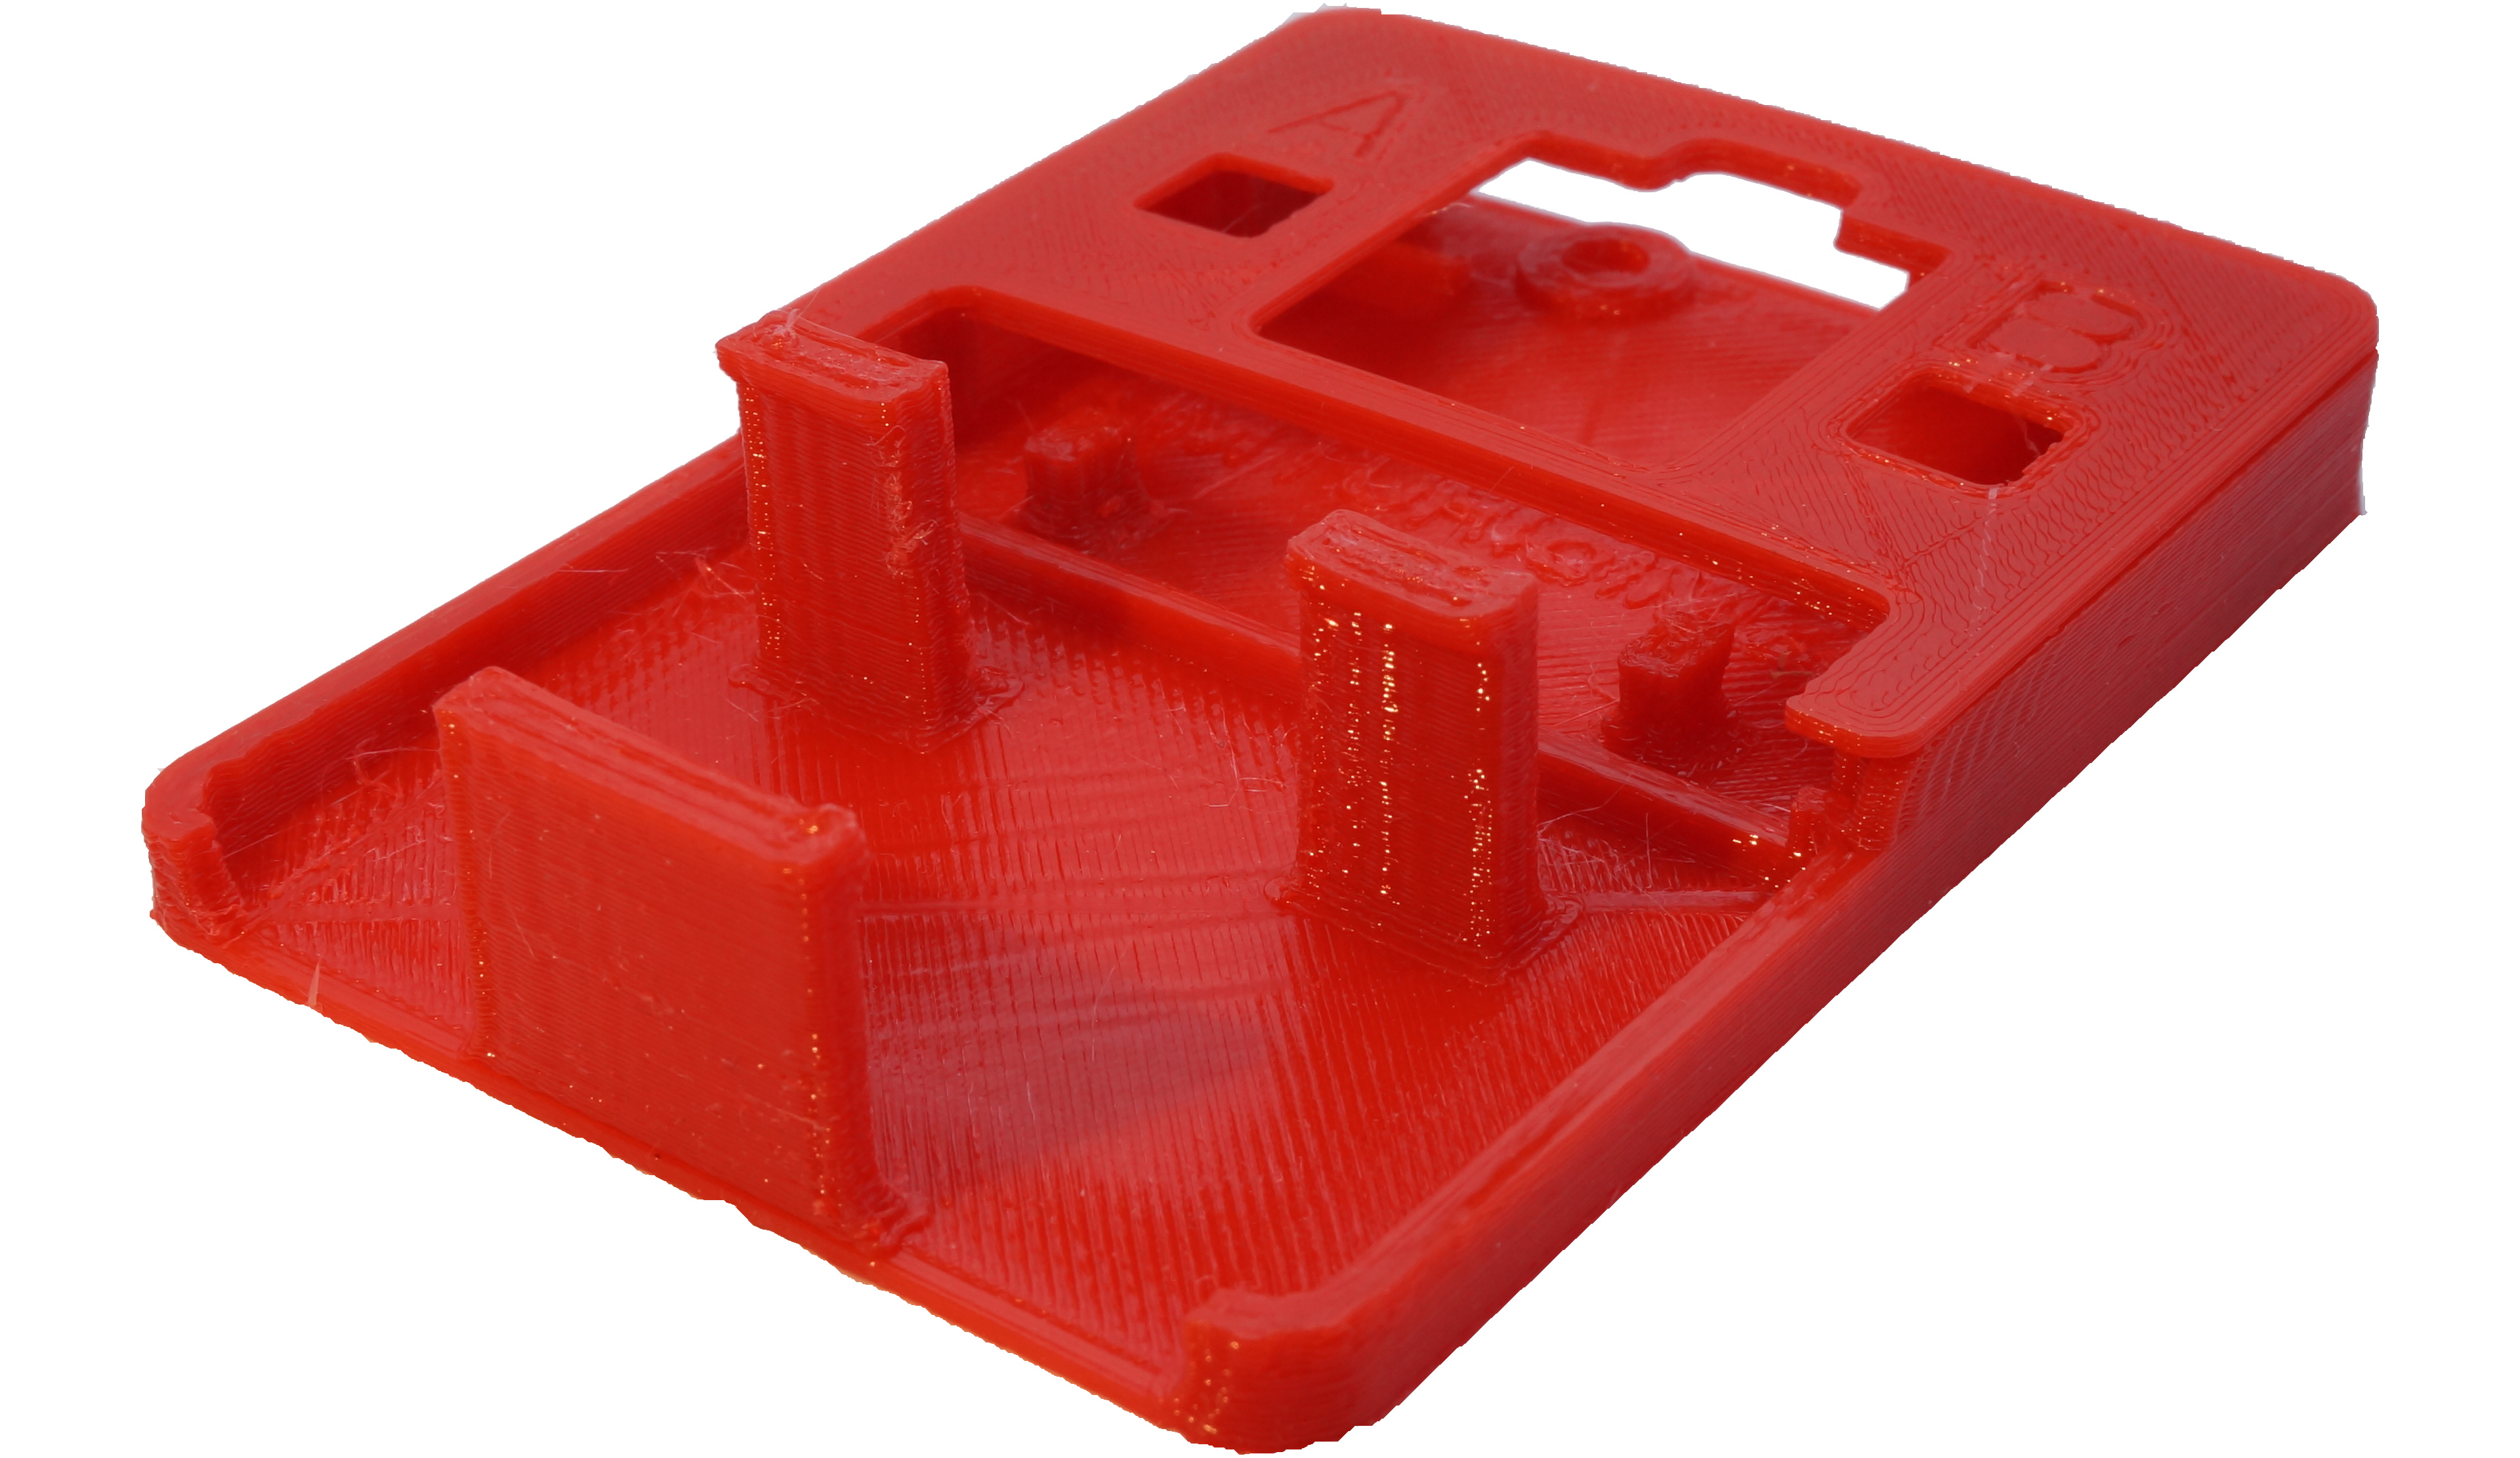 Kimturcase M2b for BBC microbit - Red